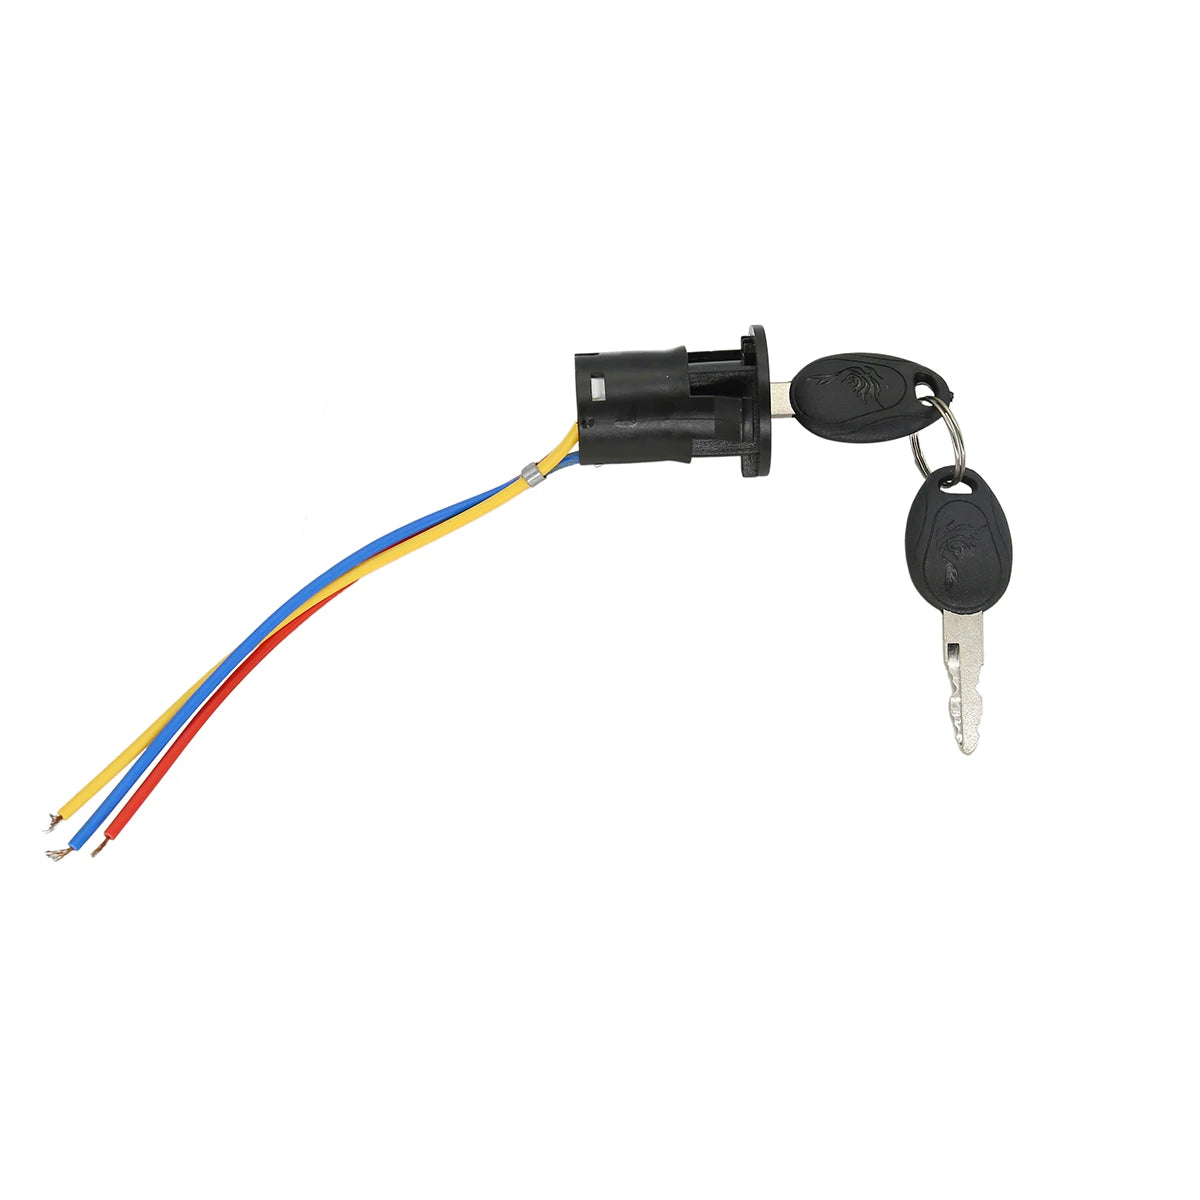 Ignition Switch Key Power Lock Universal Electric Bicycle Biking Portable Dustproof Cycling Parts for Electric Scooter